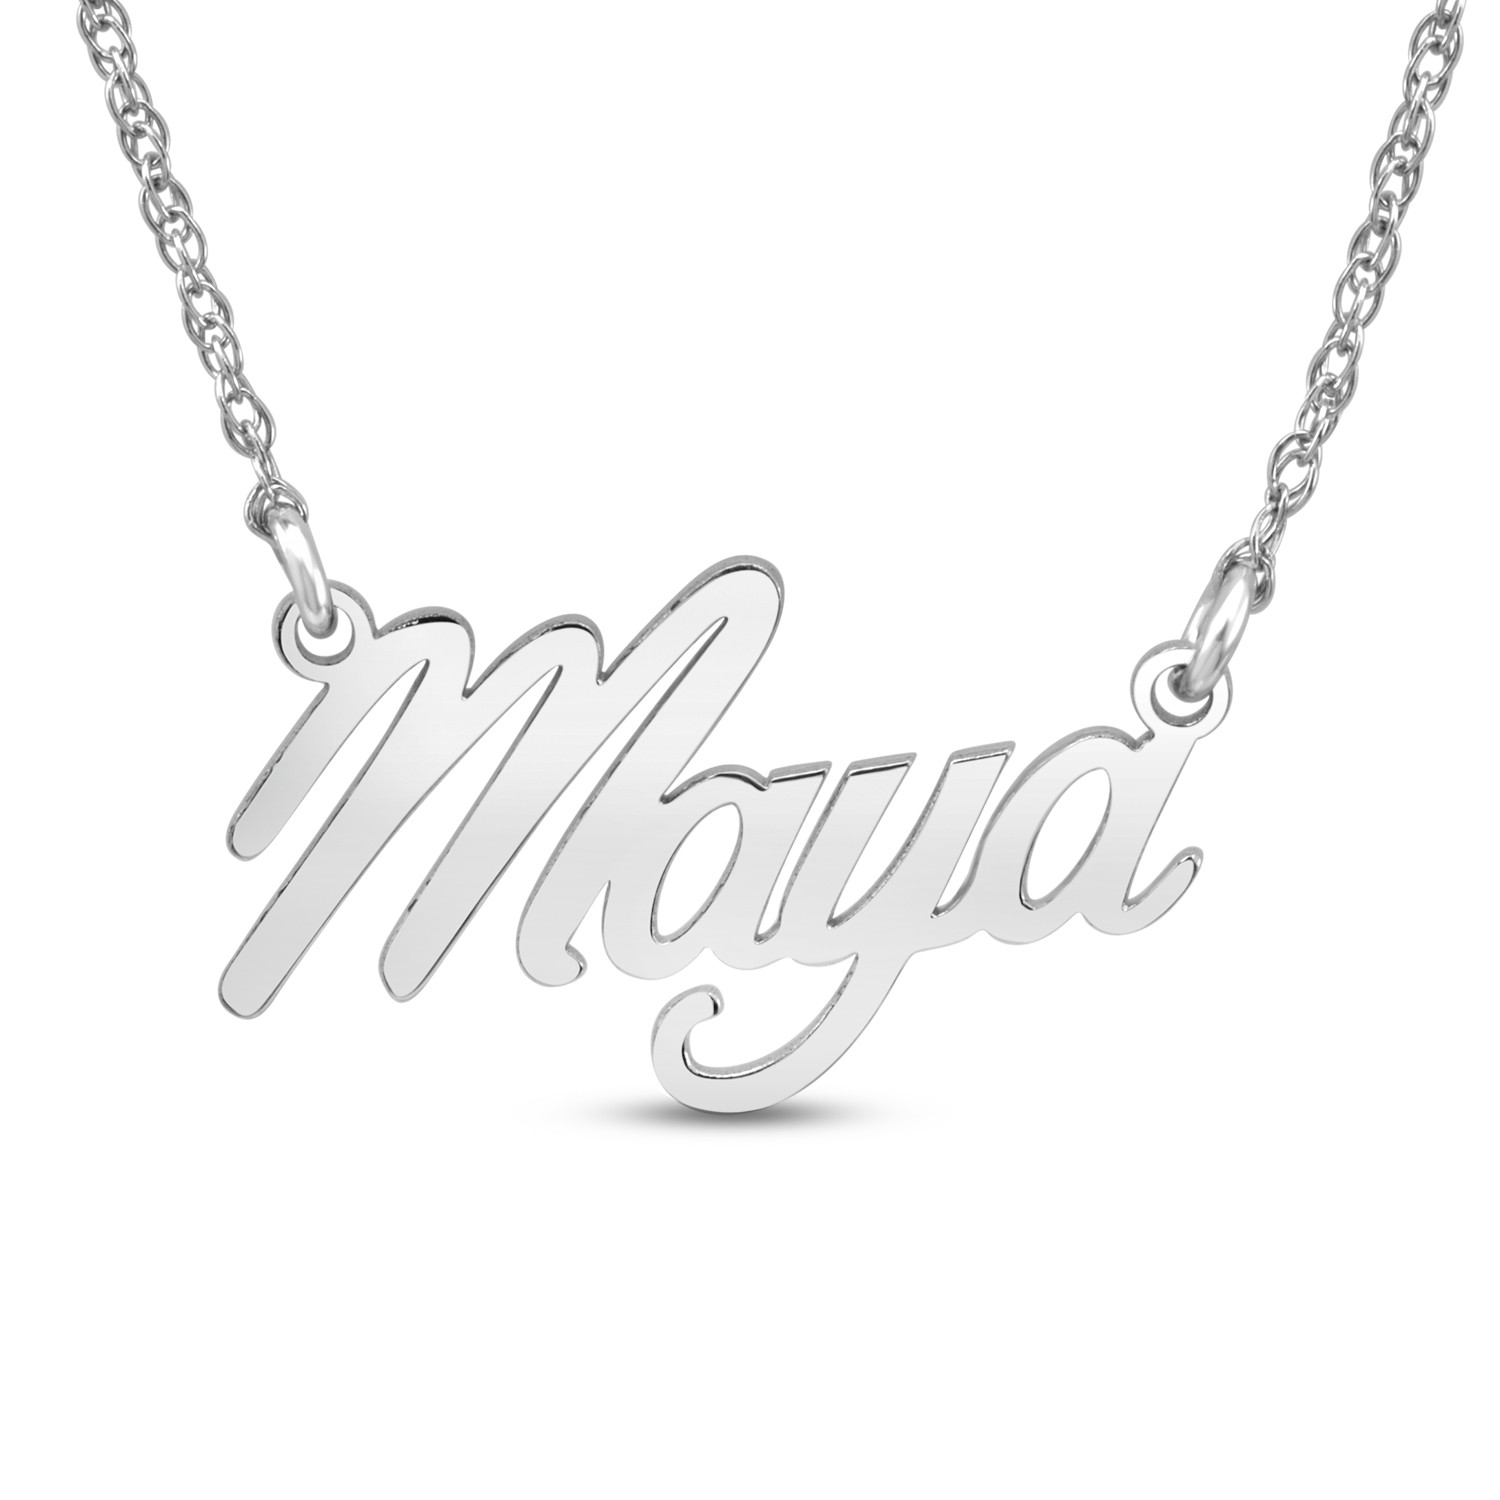 Uppercase Block Letter Charm Name Necklace in Sterling Silver with 14K Gold  Plate (1 Line)